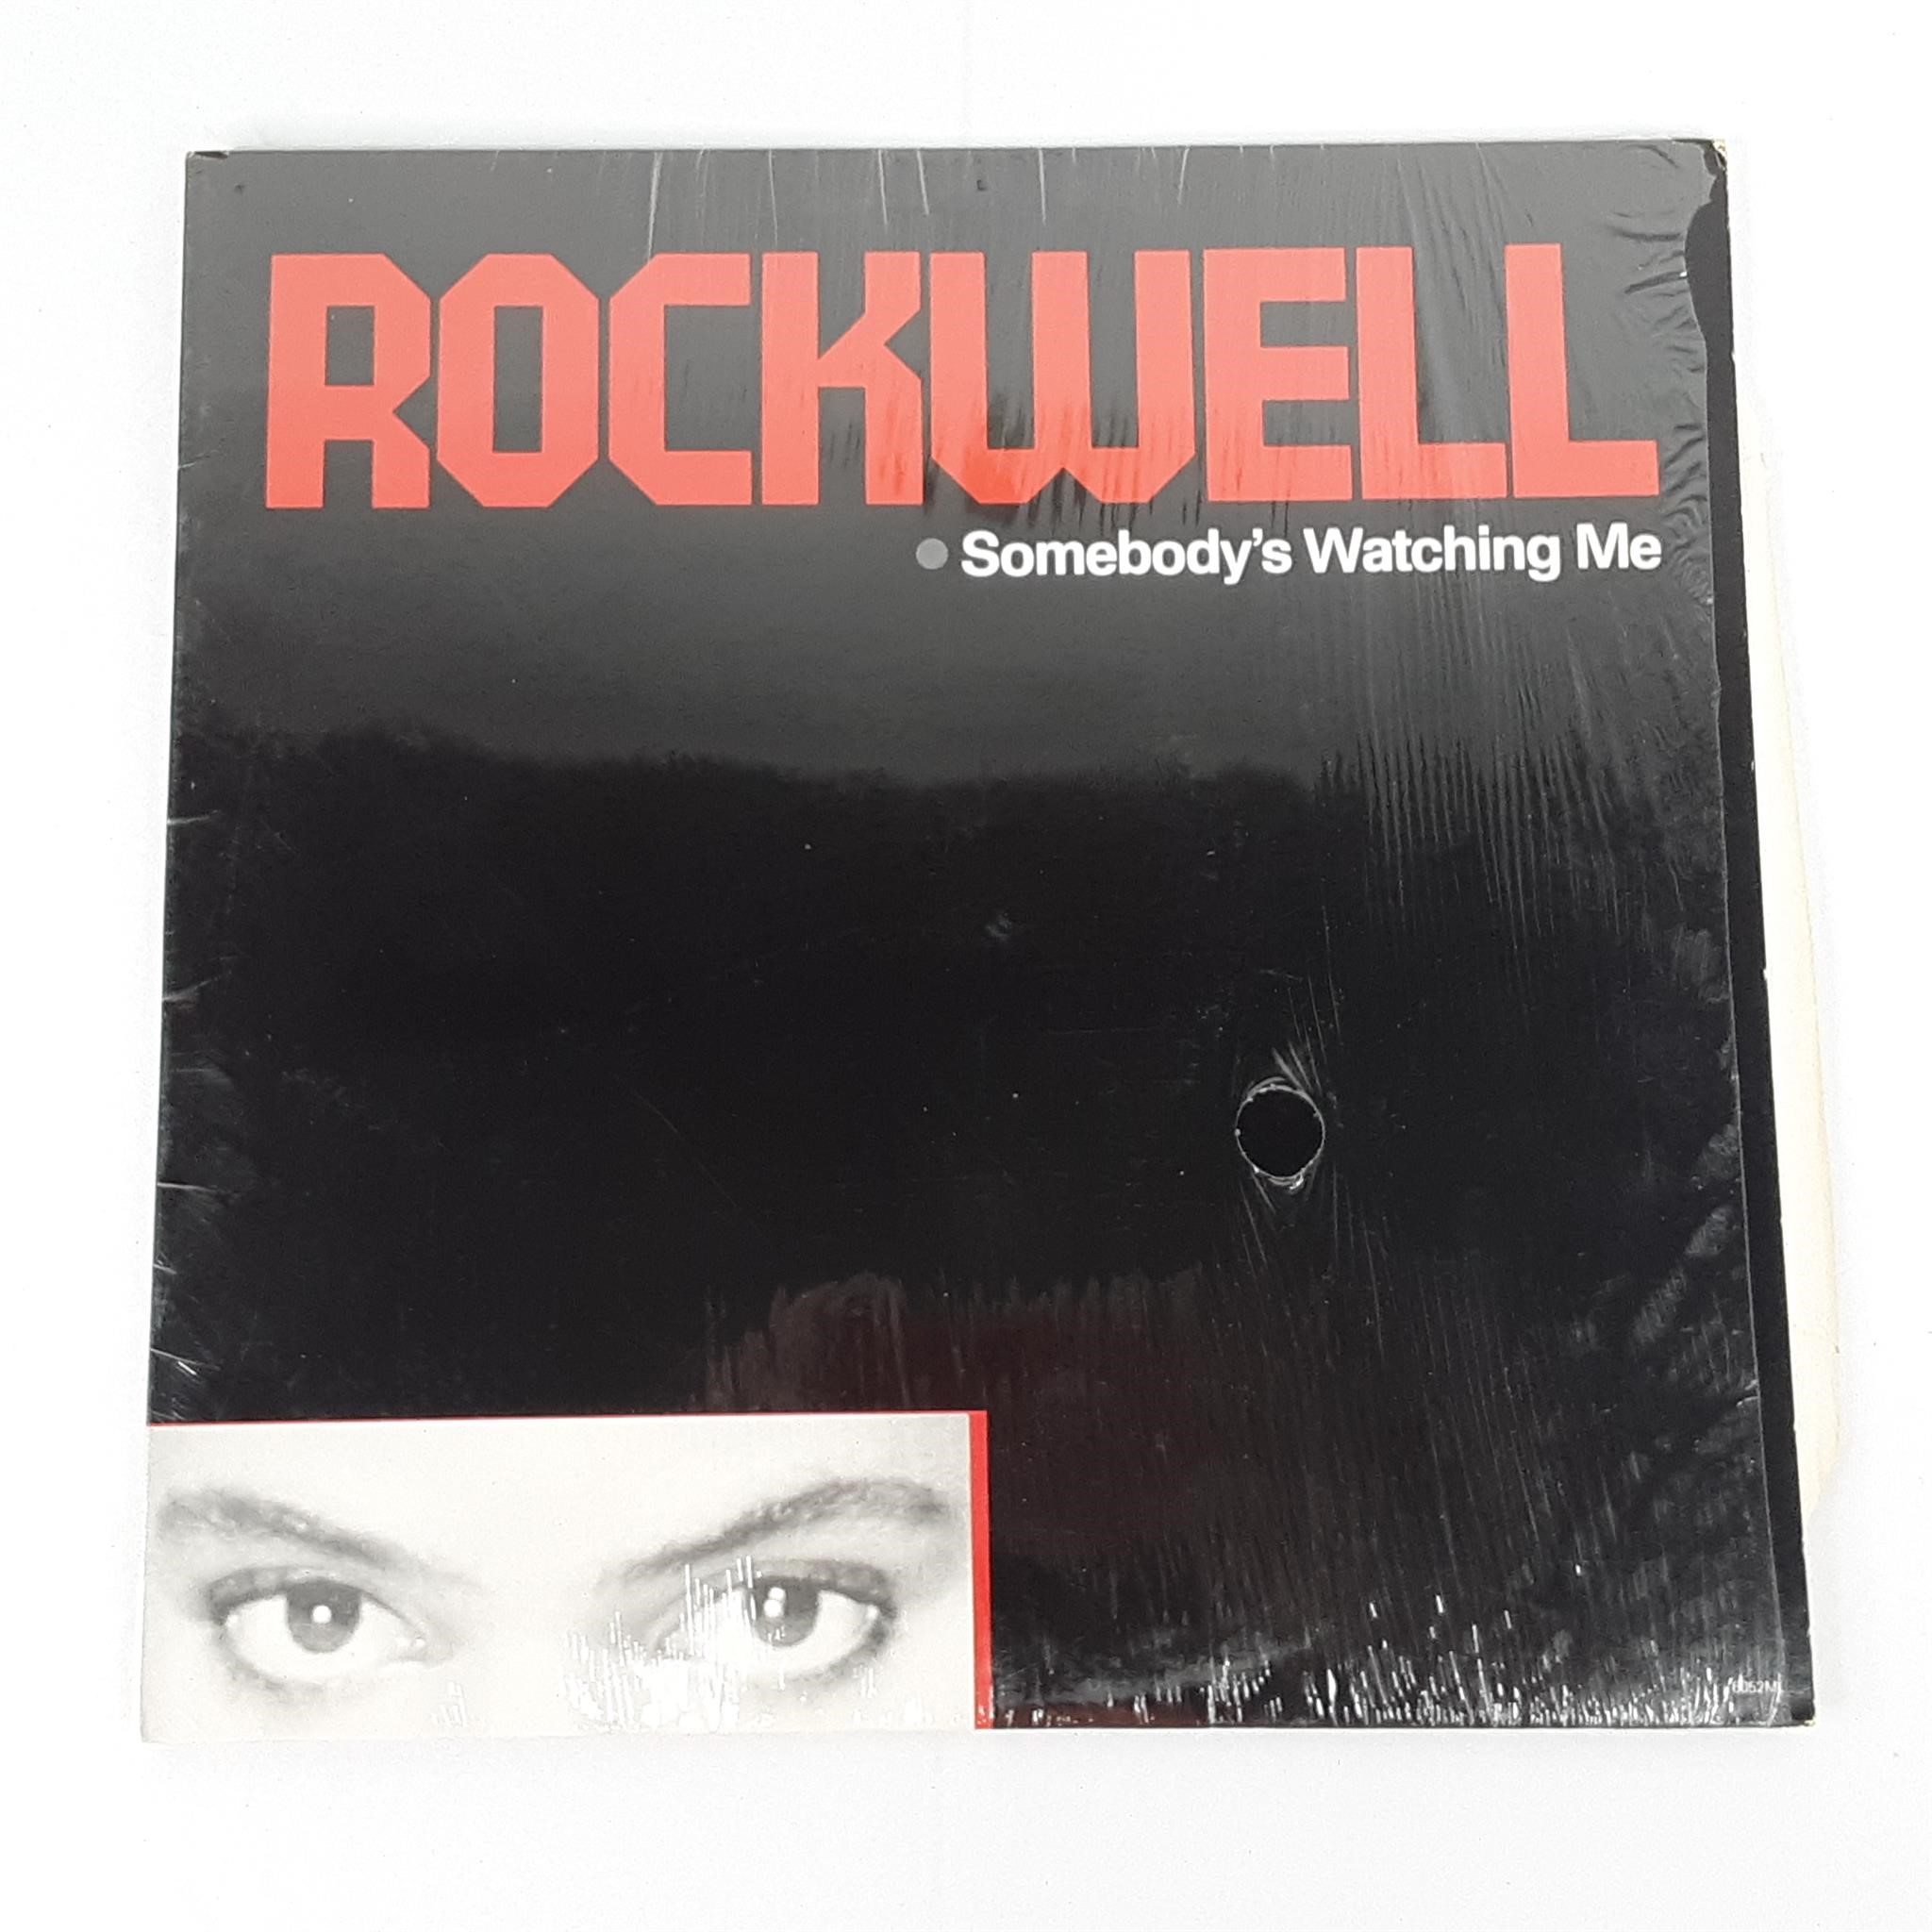 Rockwell Somebody's Watching Me